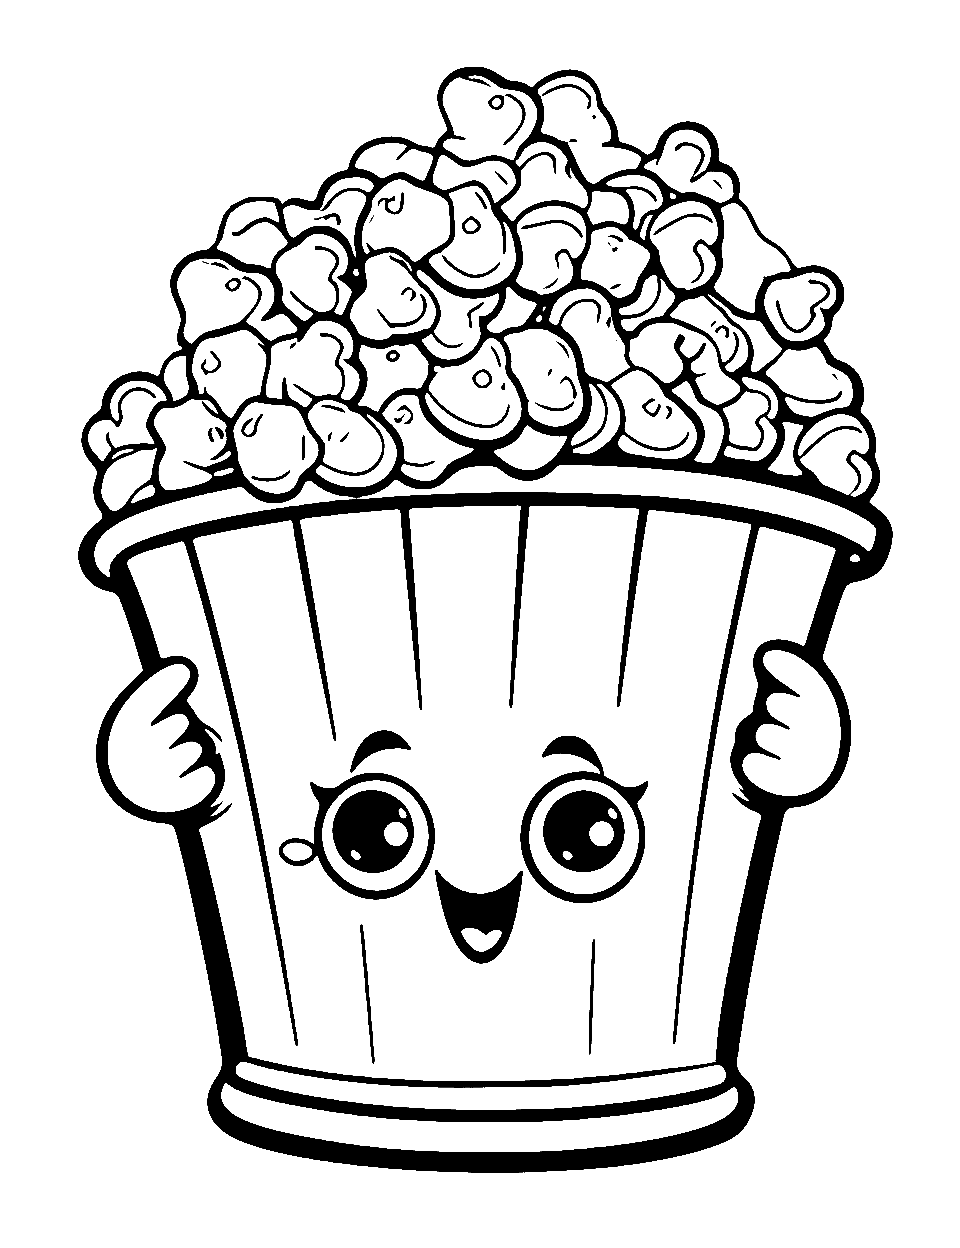 Shopkins coloring pages free printable sheets